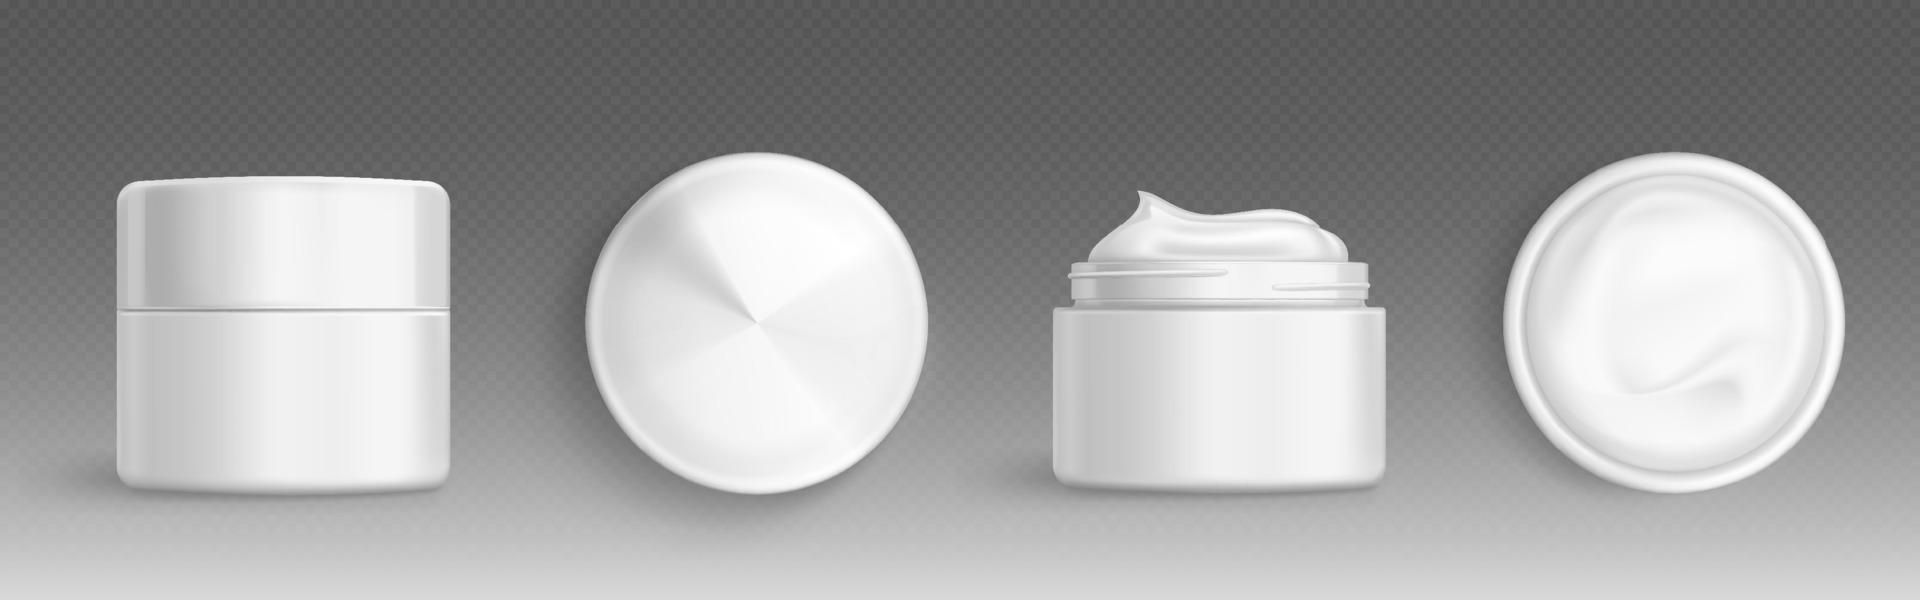 Cream jar, cosmetics package for face or skin care vector